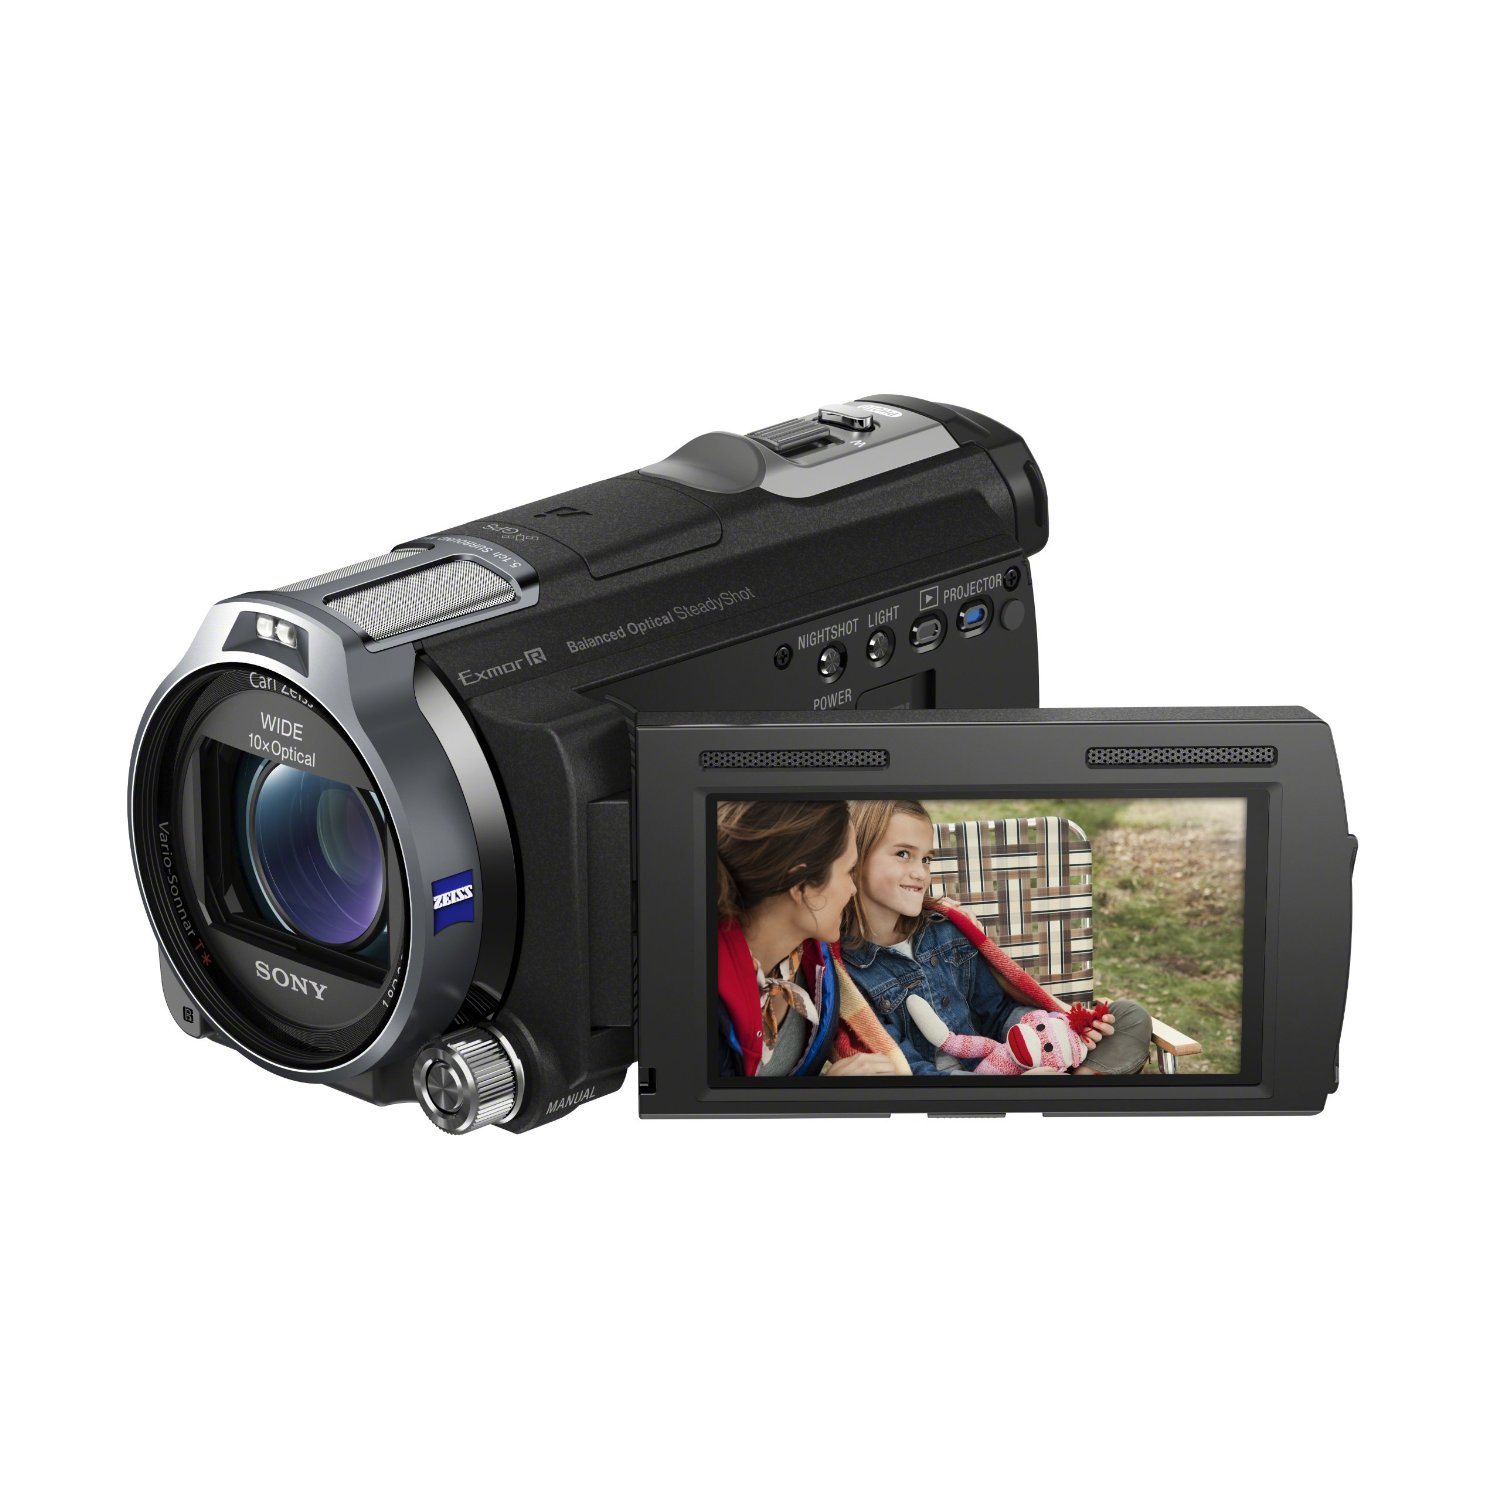 http://thetechjournal.com/wp-content/uploads/images/1201/1327336709-sony-hdrpj760v-241-mp-camcorder-high-definition-handycam-2.jpg